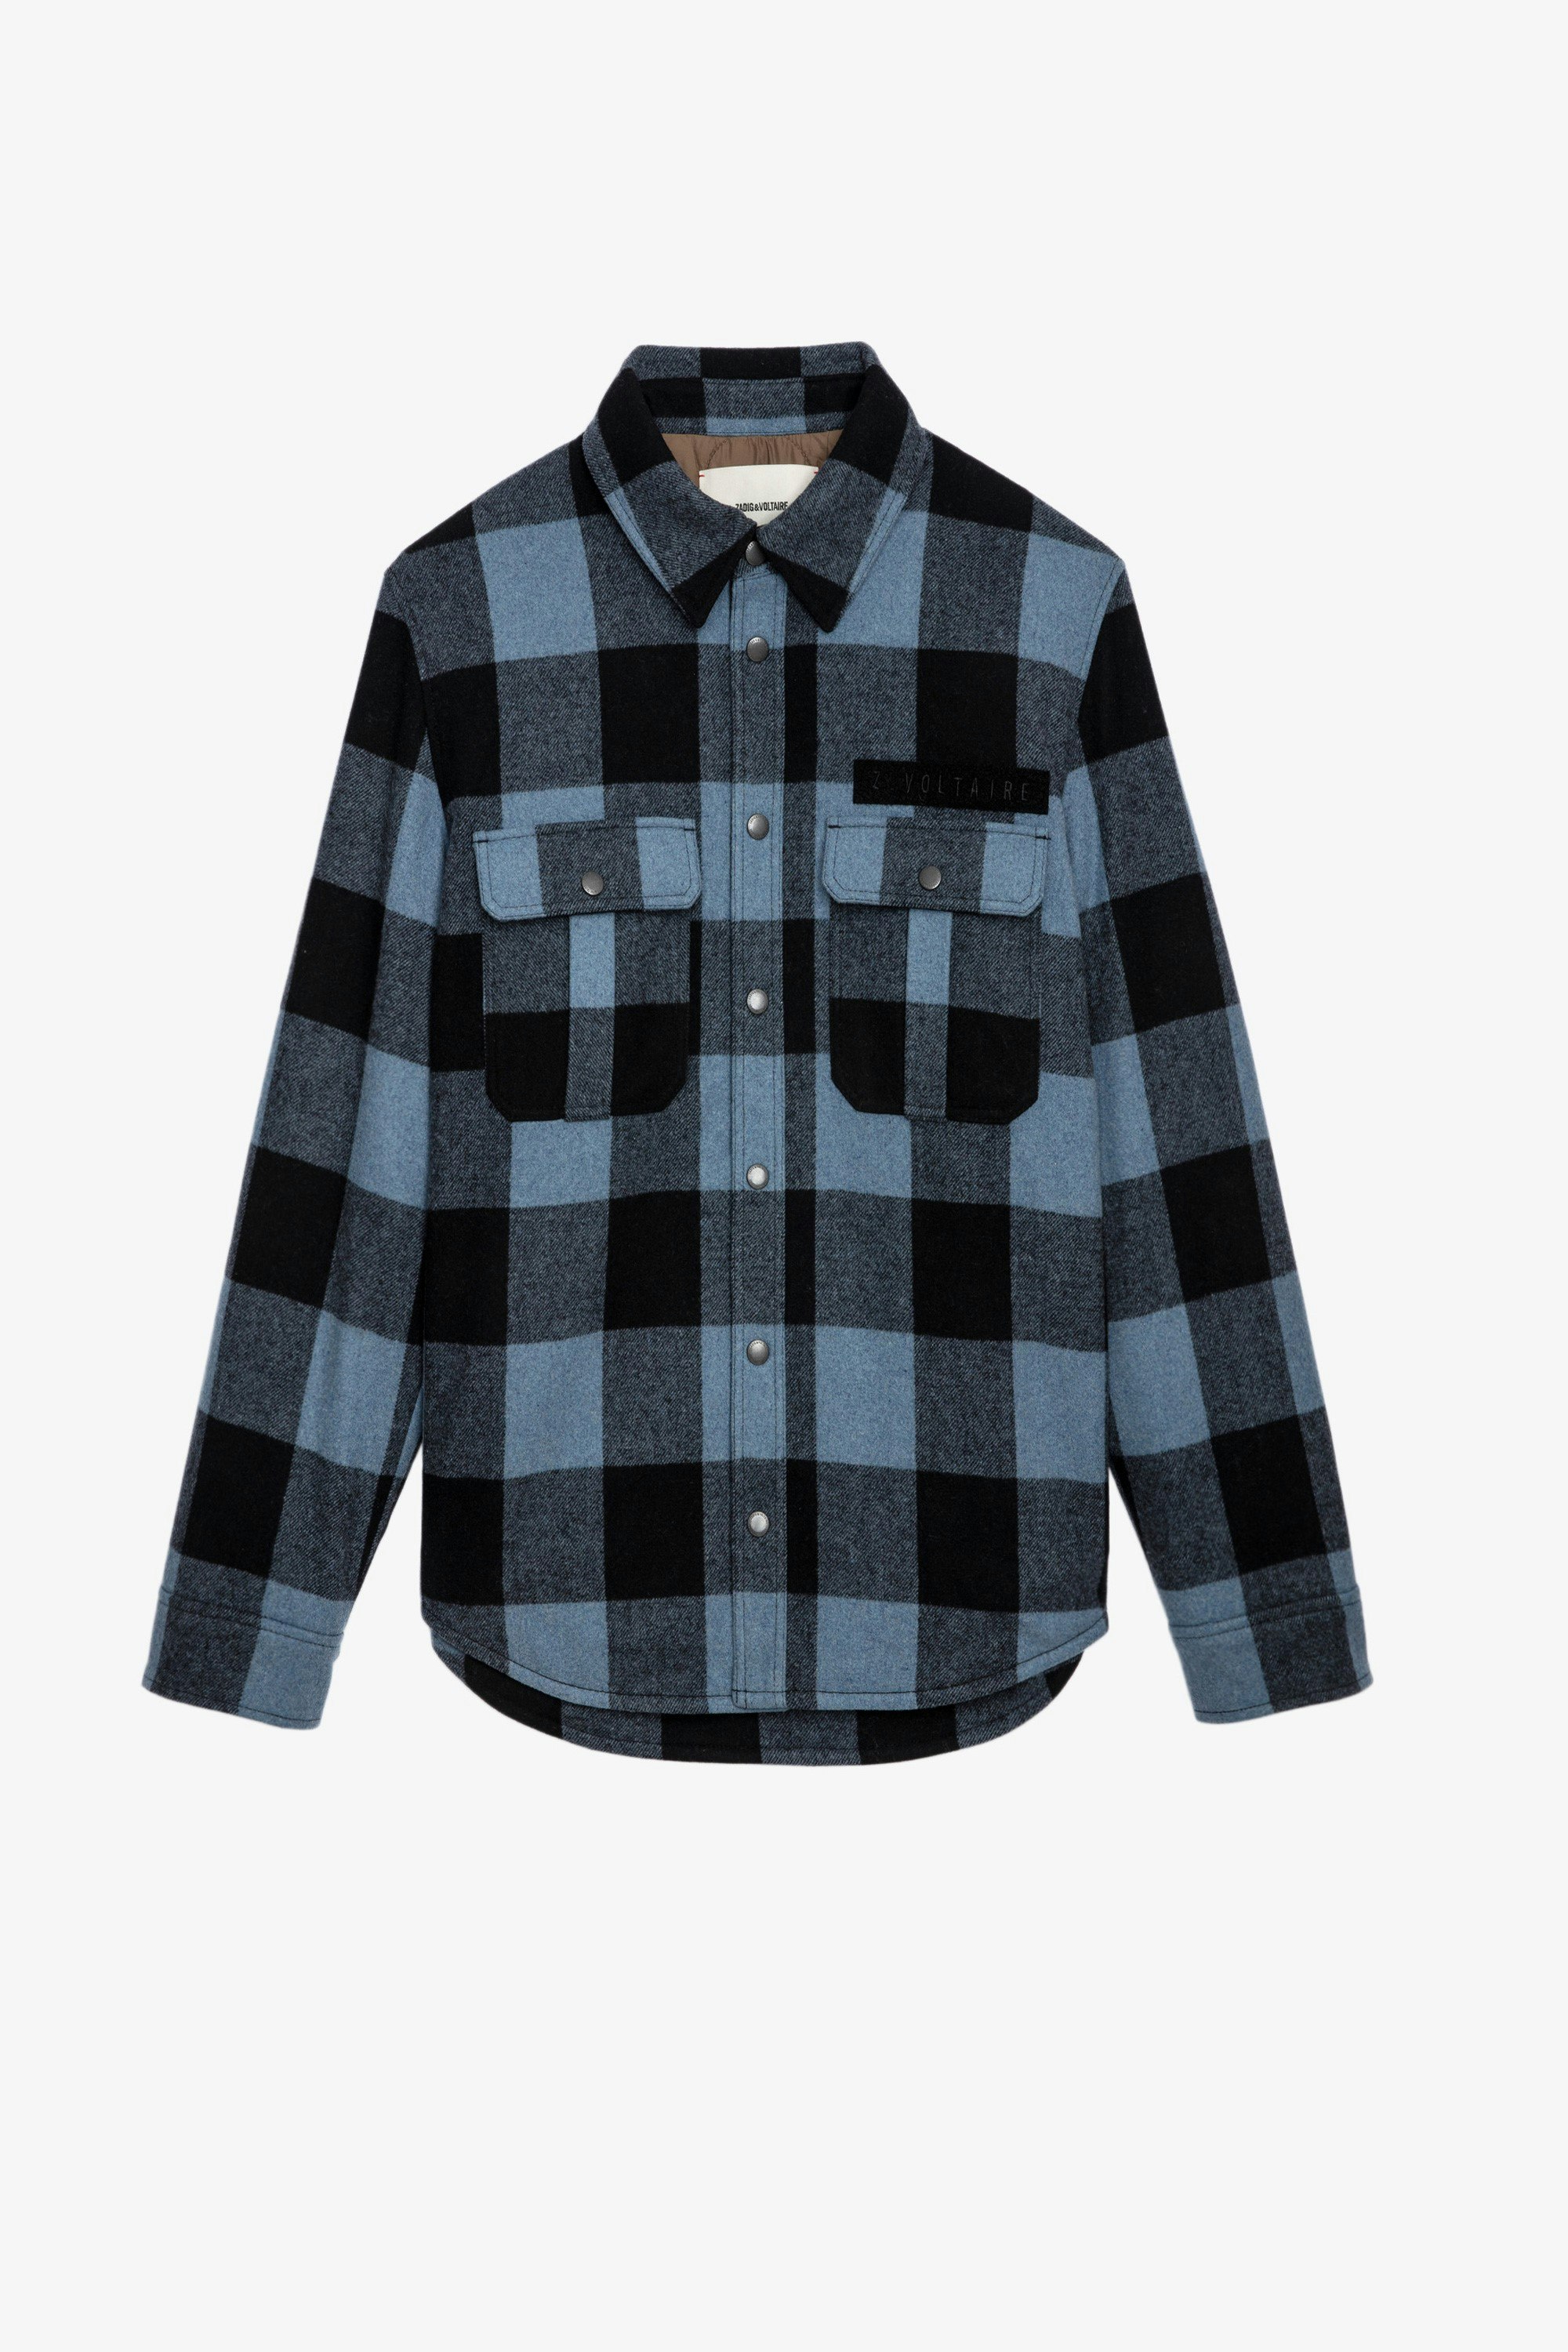 Bali Overシャツ Men’s checked blue overshirt with skull motif on the back 